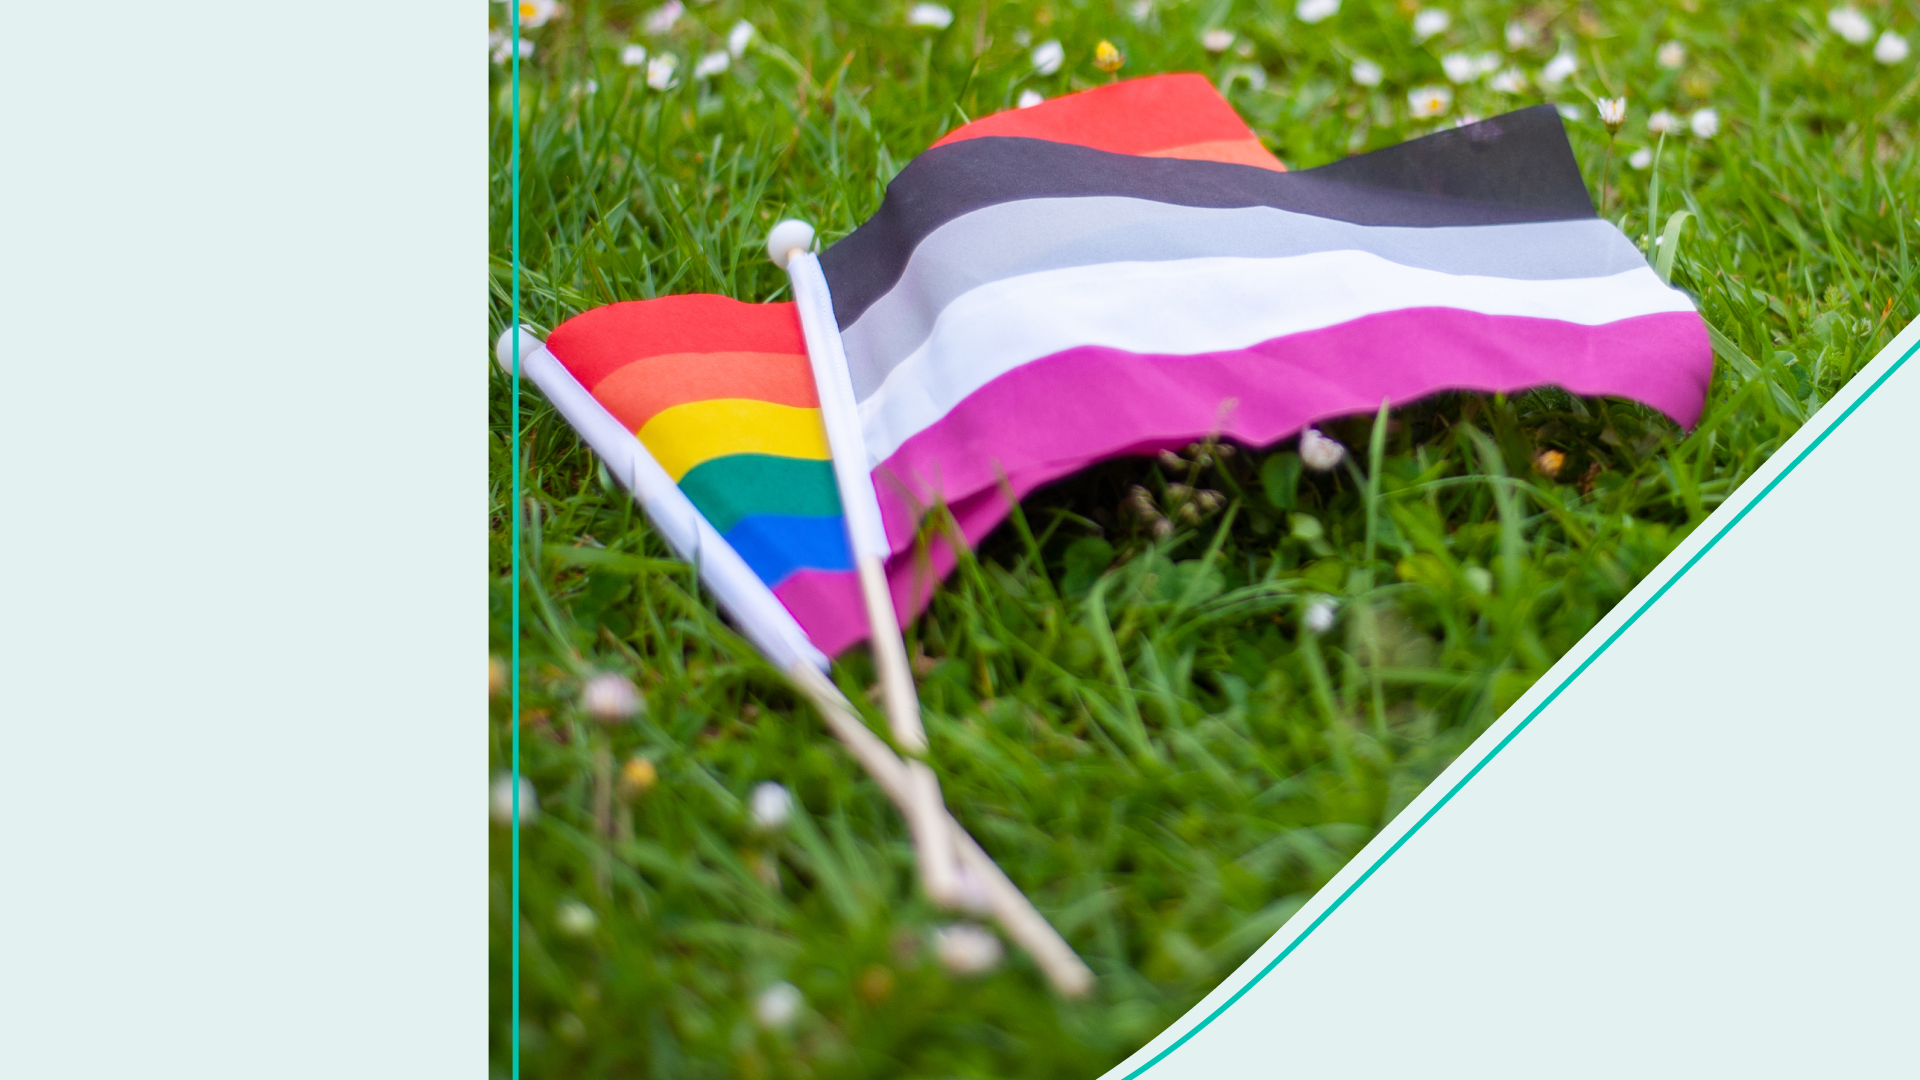 The LGBTQ+ flag and the Asexuality flag on grass 